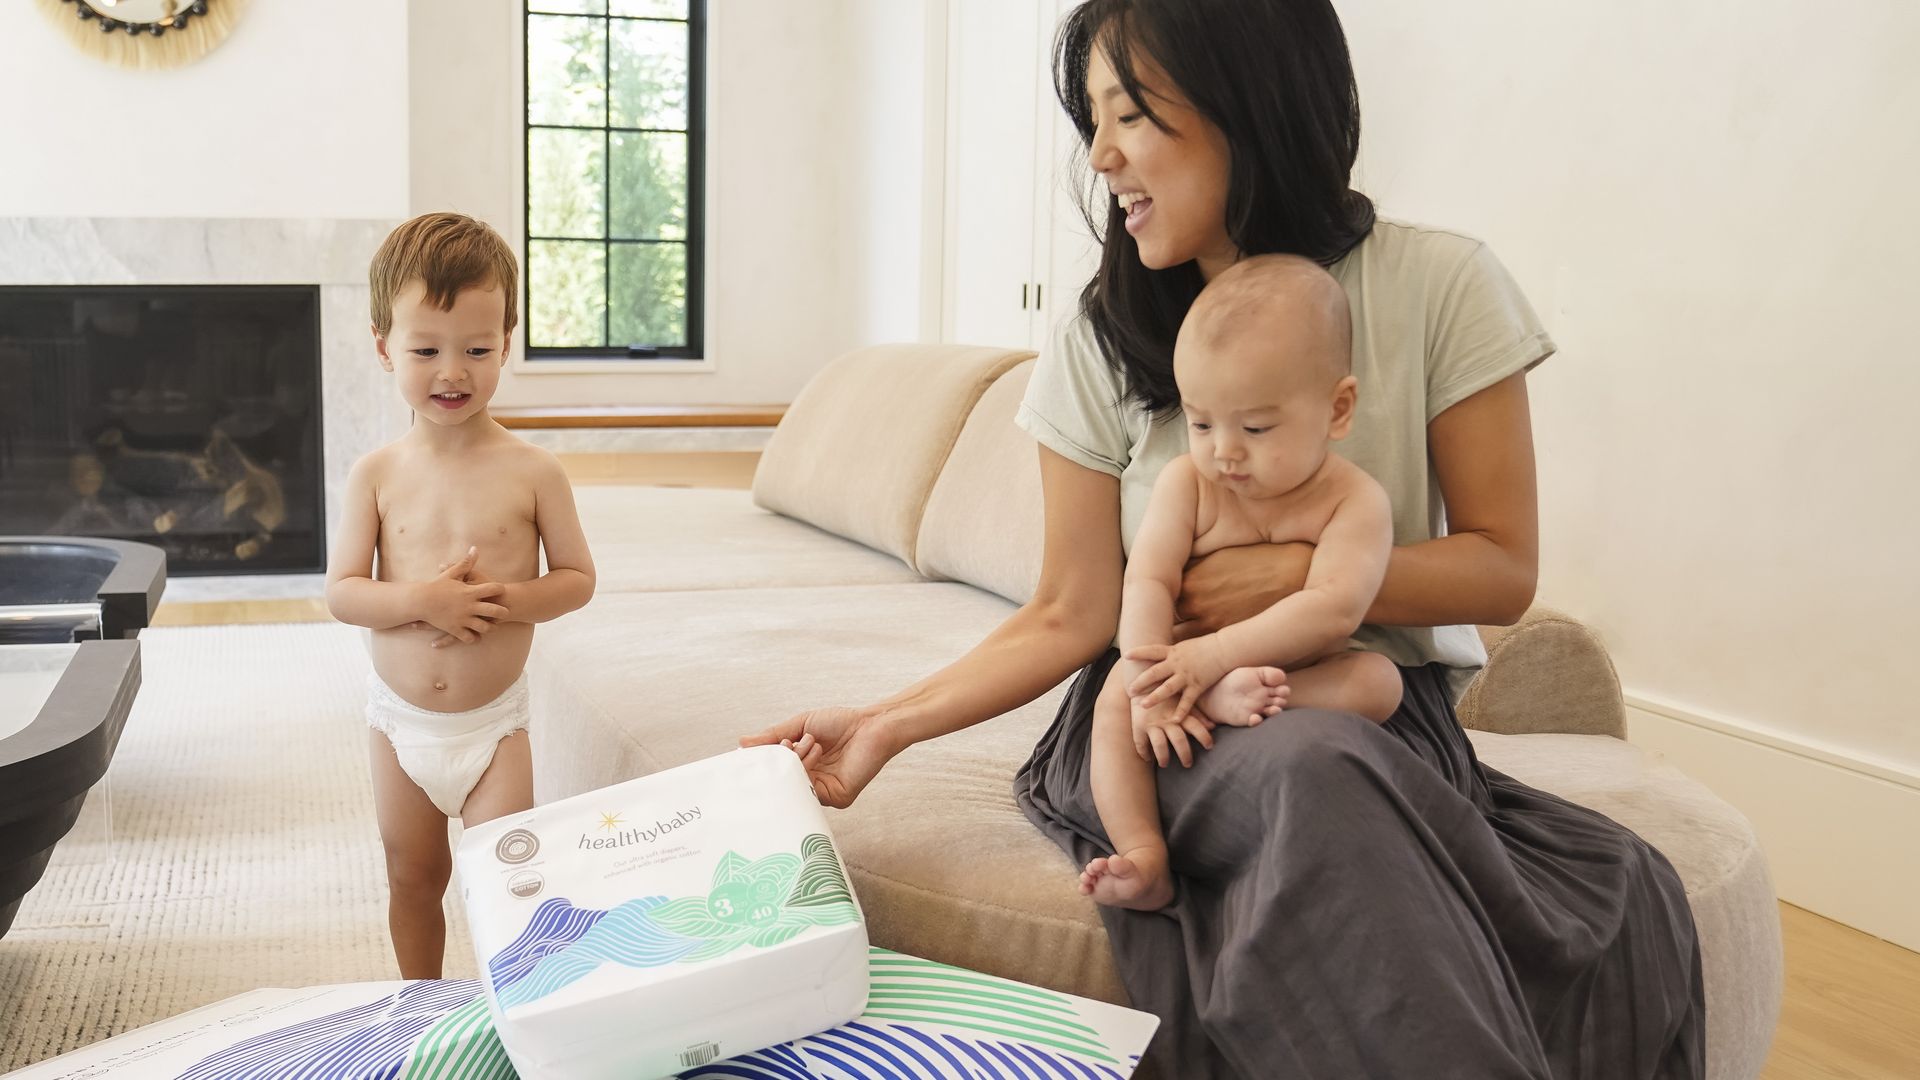 A mother with dark hair sits in a living room swathed in a blanket with her infant and toddler as she examines a package of Healthybaby diapers.